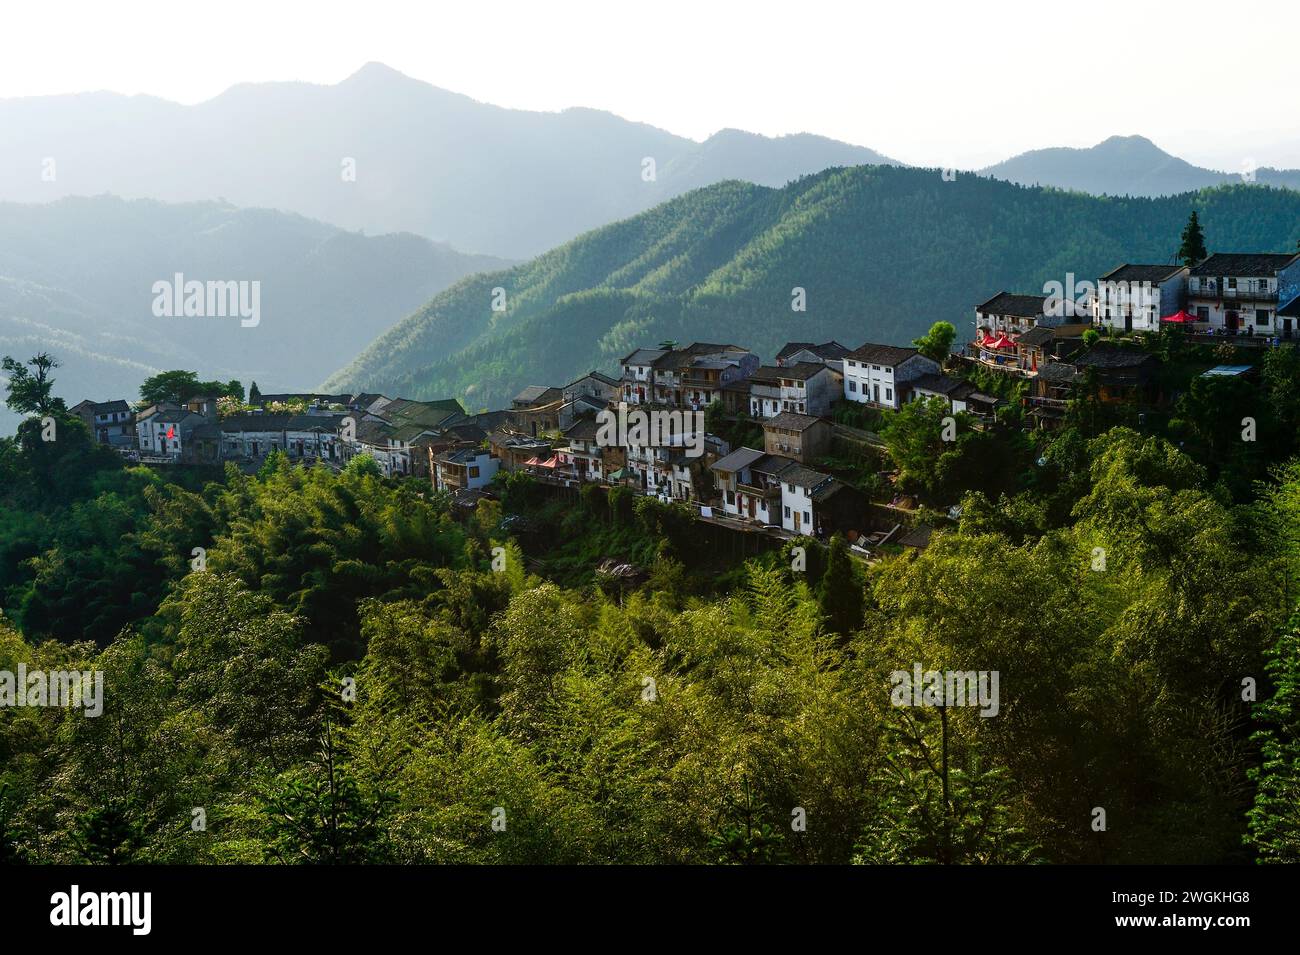 Mu Li Hong Village (also referred to as Zhanlicun) is a small, hill side town in South China, well off the beaten path for tourists but well worth the Stock Photo